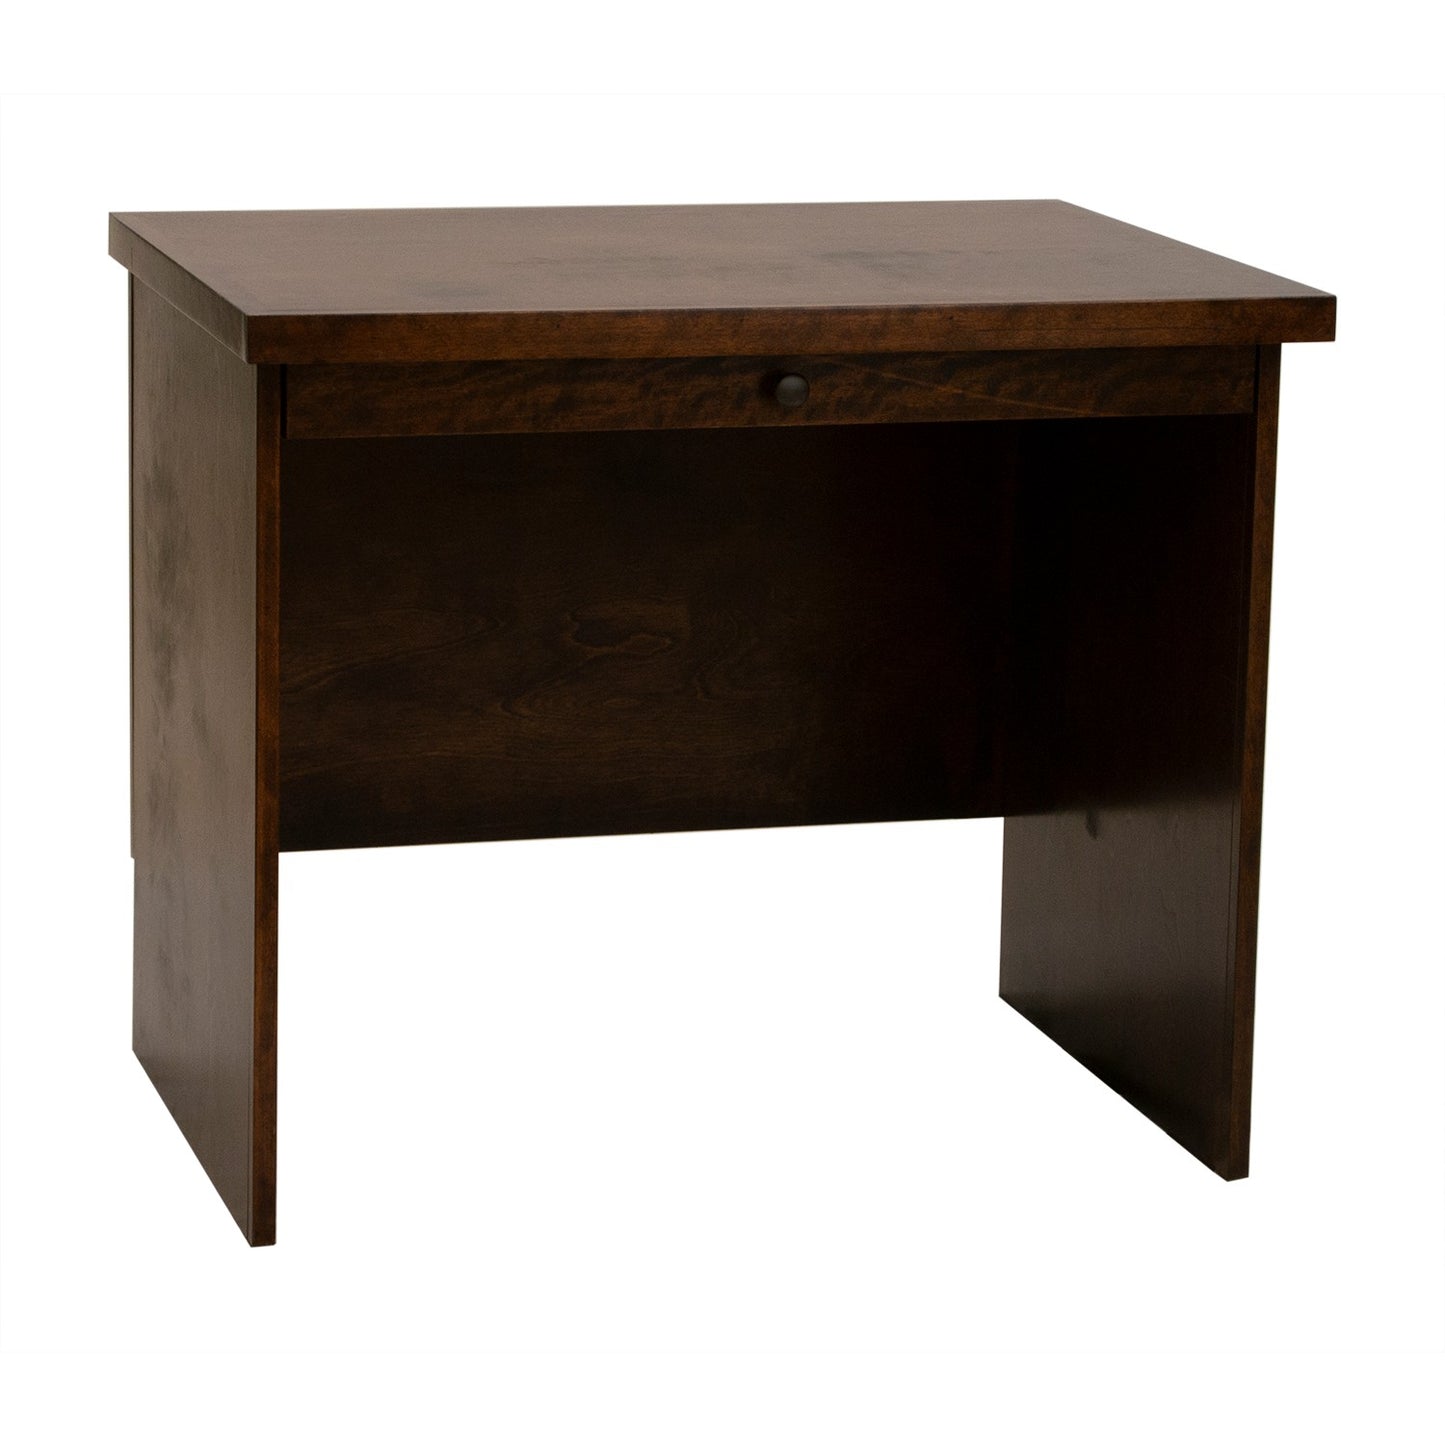 Berkshire Small Desk with Privacy Panel is built from birch and feature full extension glides. Shown in Espresso finish.